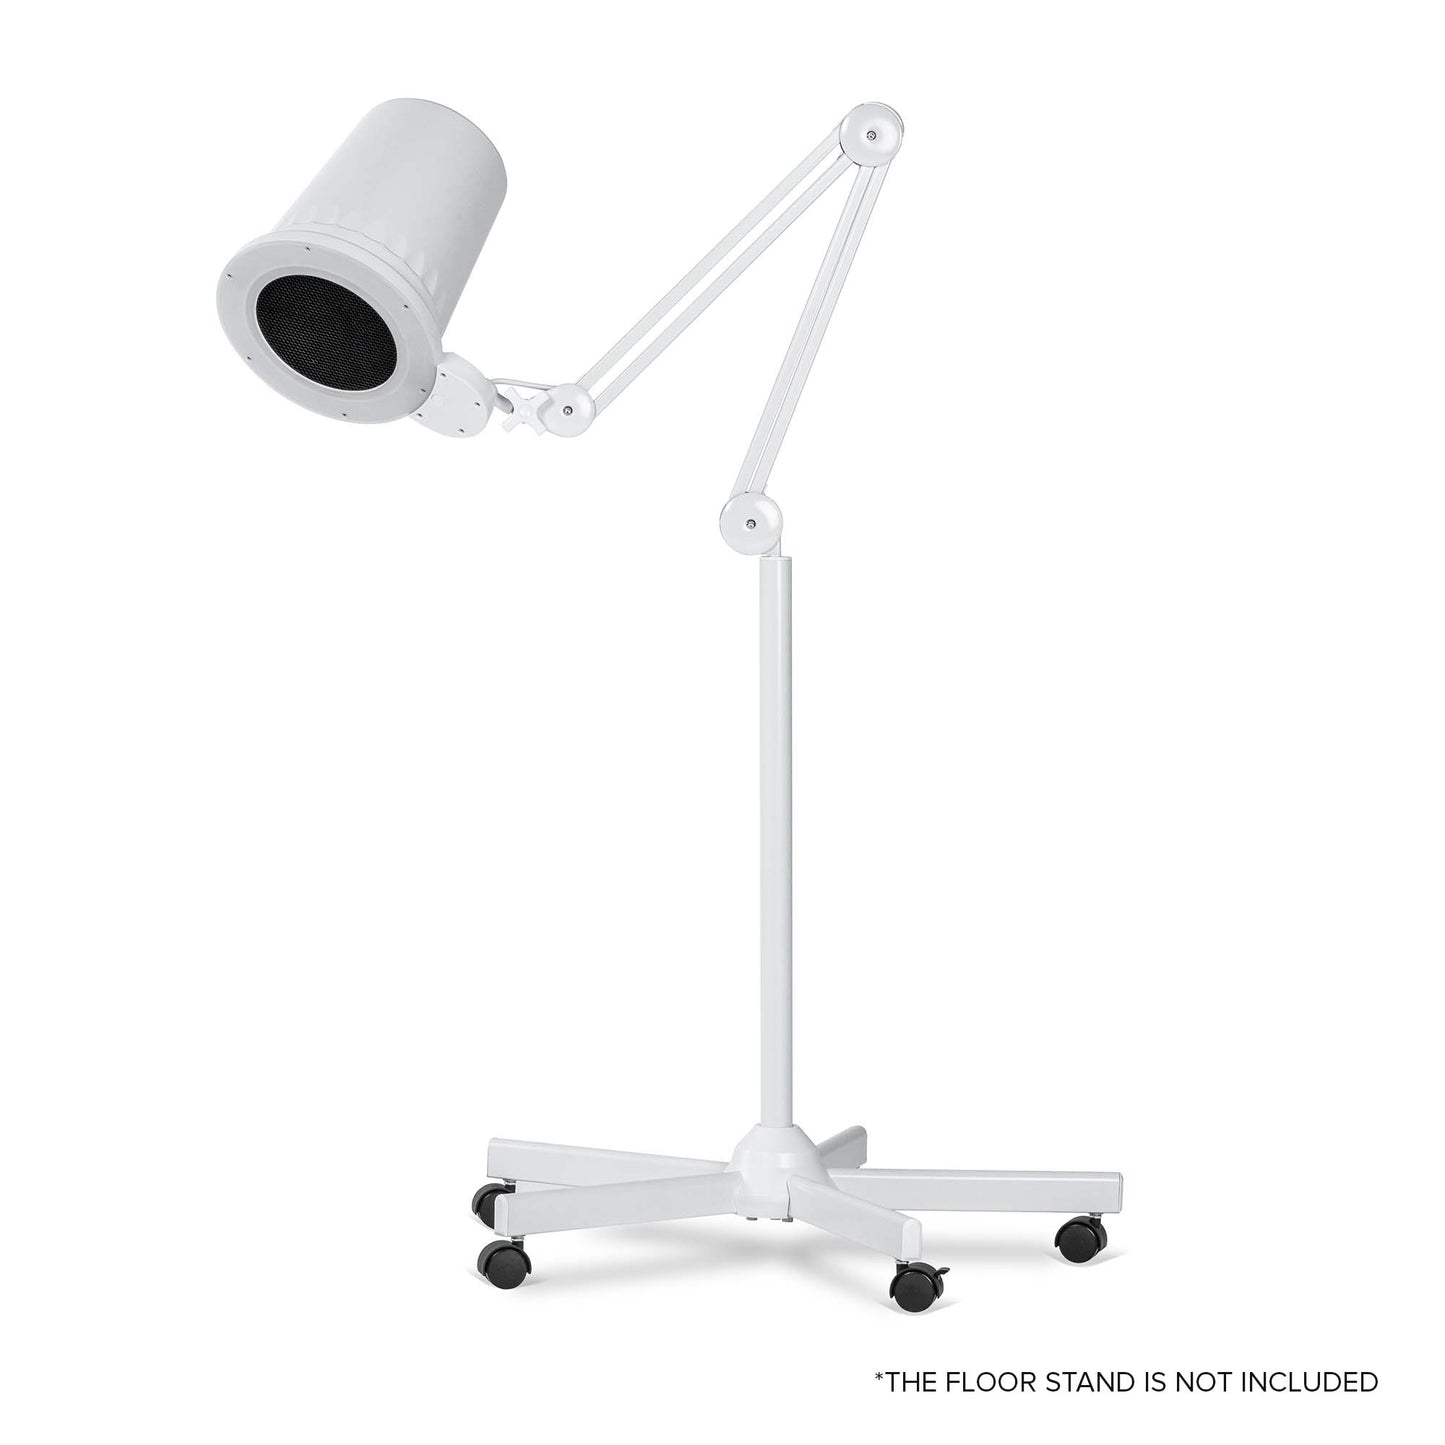 4BLANC floor stand for nail dust collector